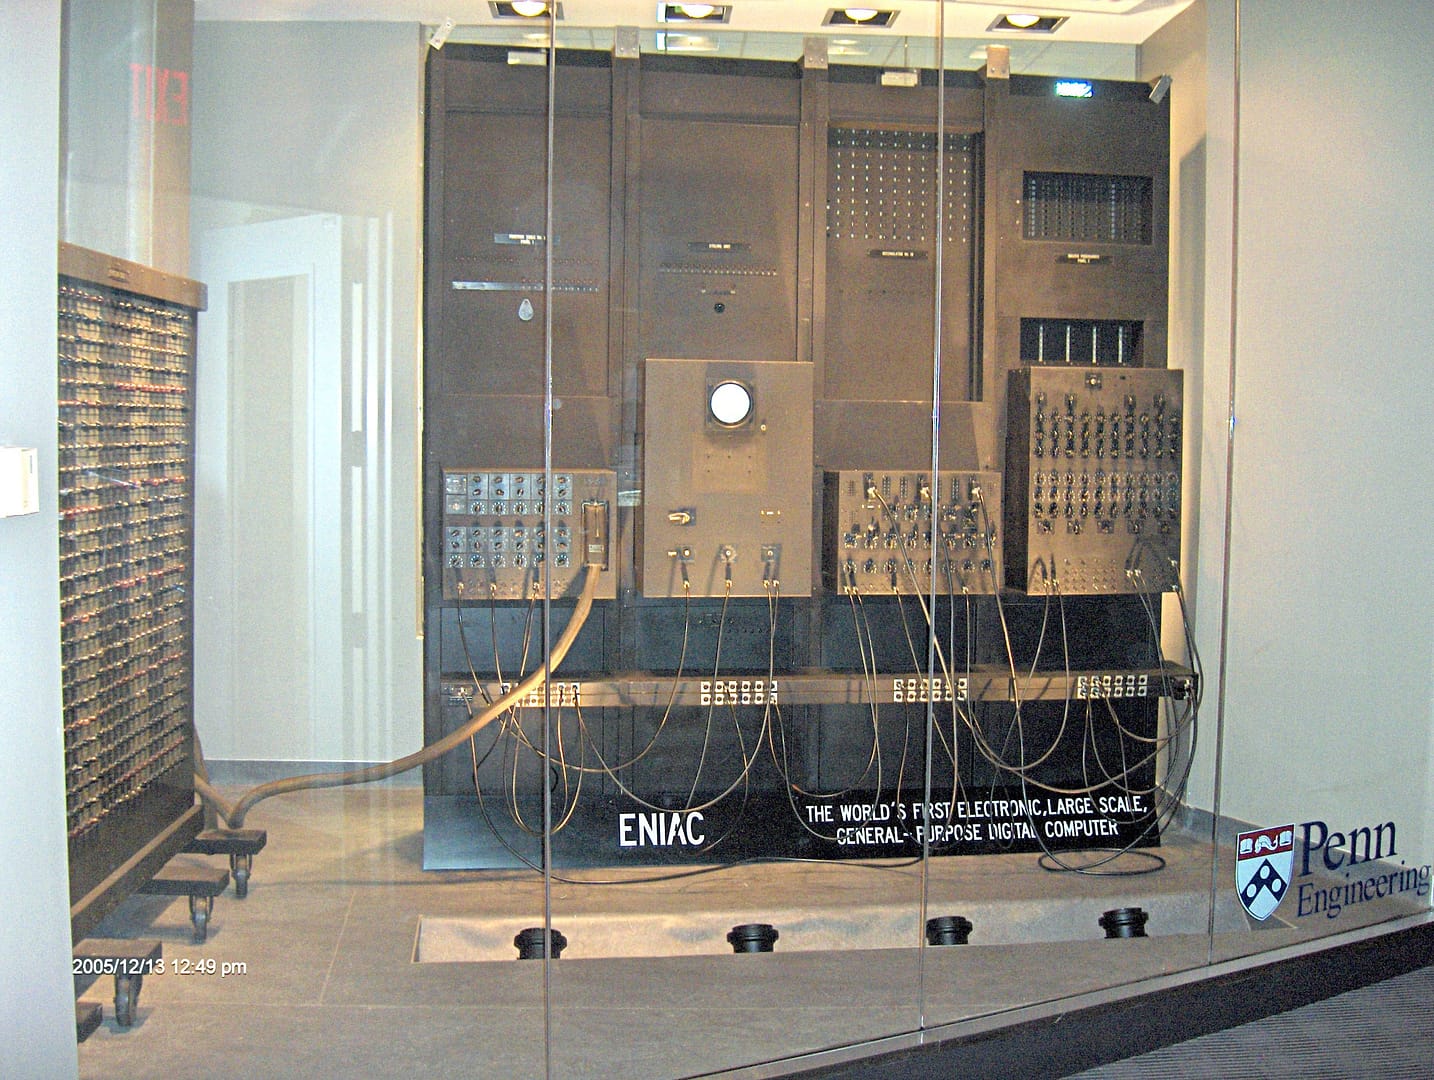 A photograph of the tube based programmable calculator ENIAC